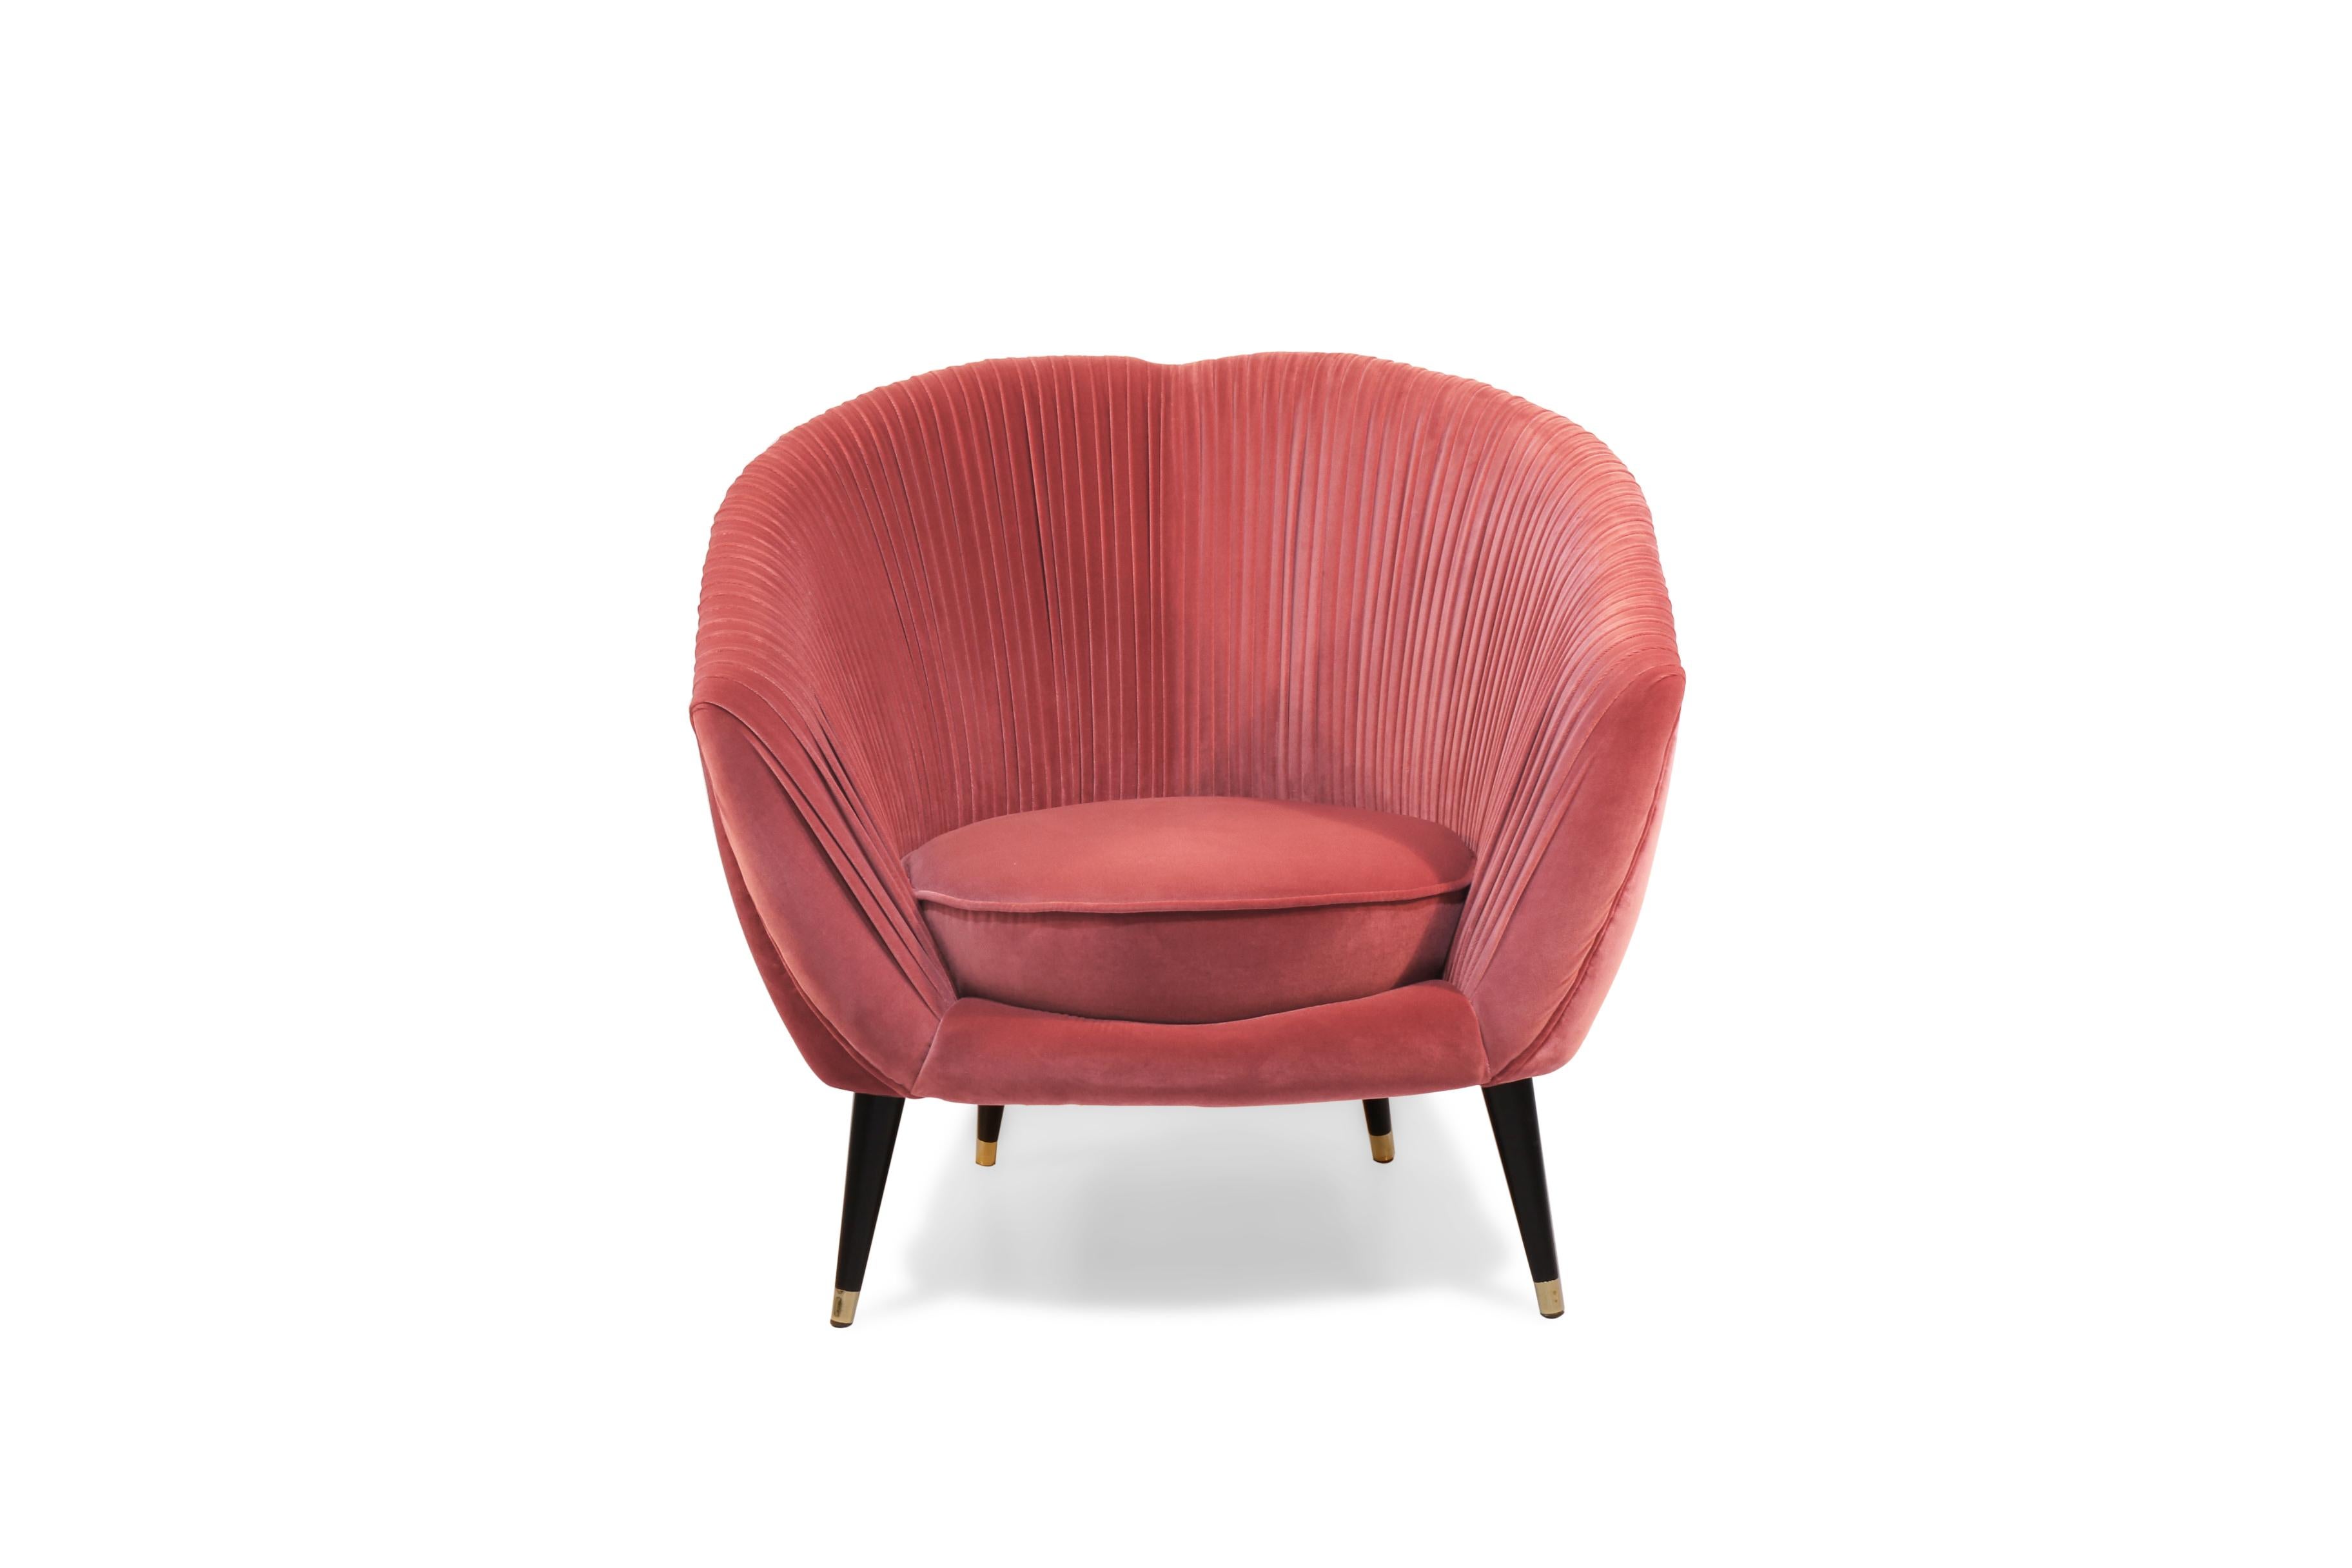 You’ll be aching to embark on a rebellious rendezvous with Audrey. Accompanied by a petite footrest, she exudes a devil-may-care attitude which feels coolly nonchalant. Plush upholstery with feminine rouching, wraps her body like a favourite pair of